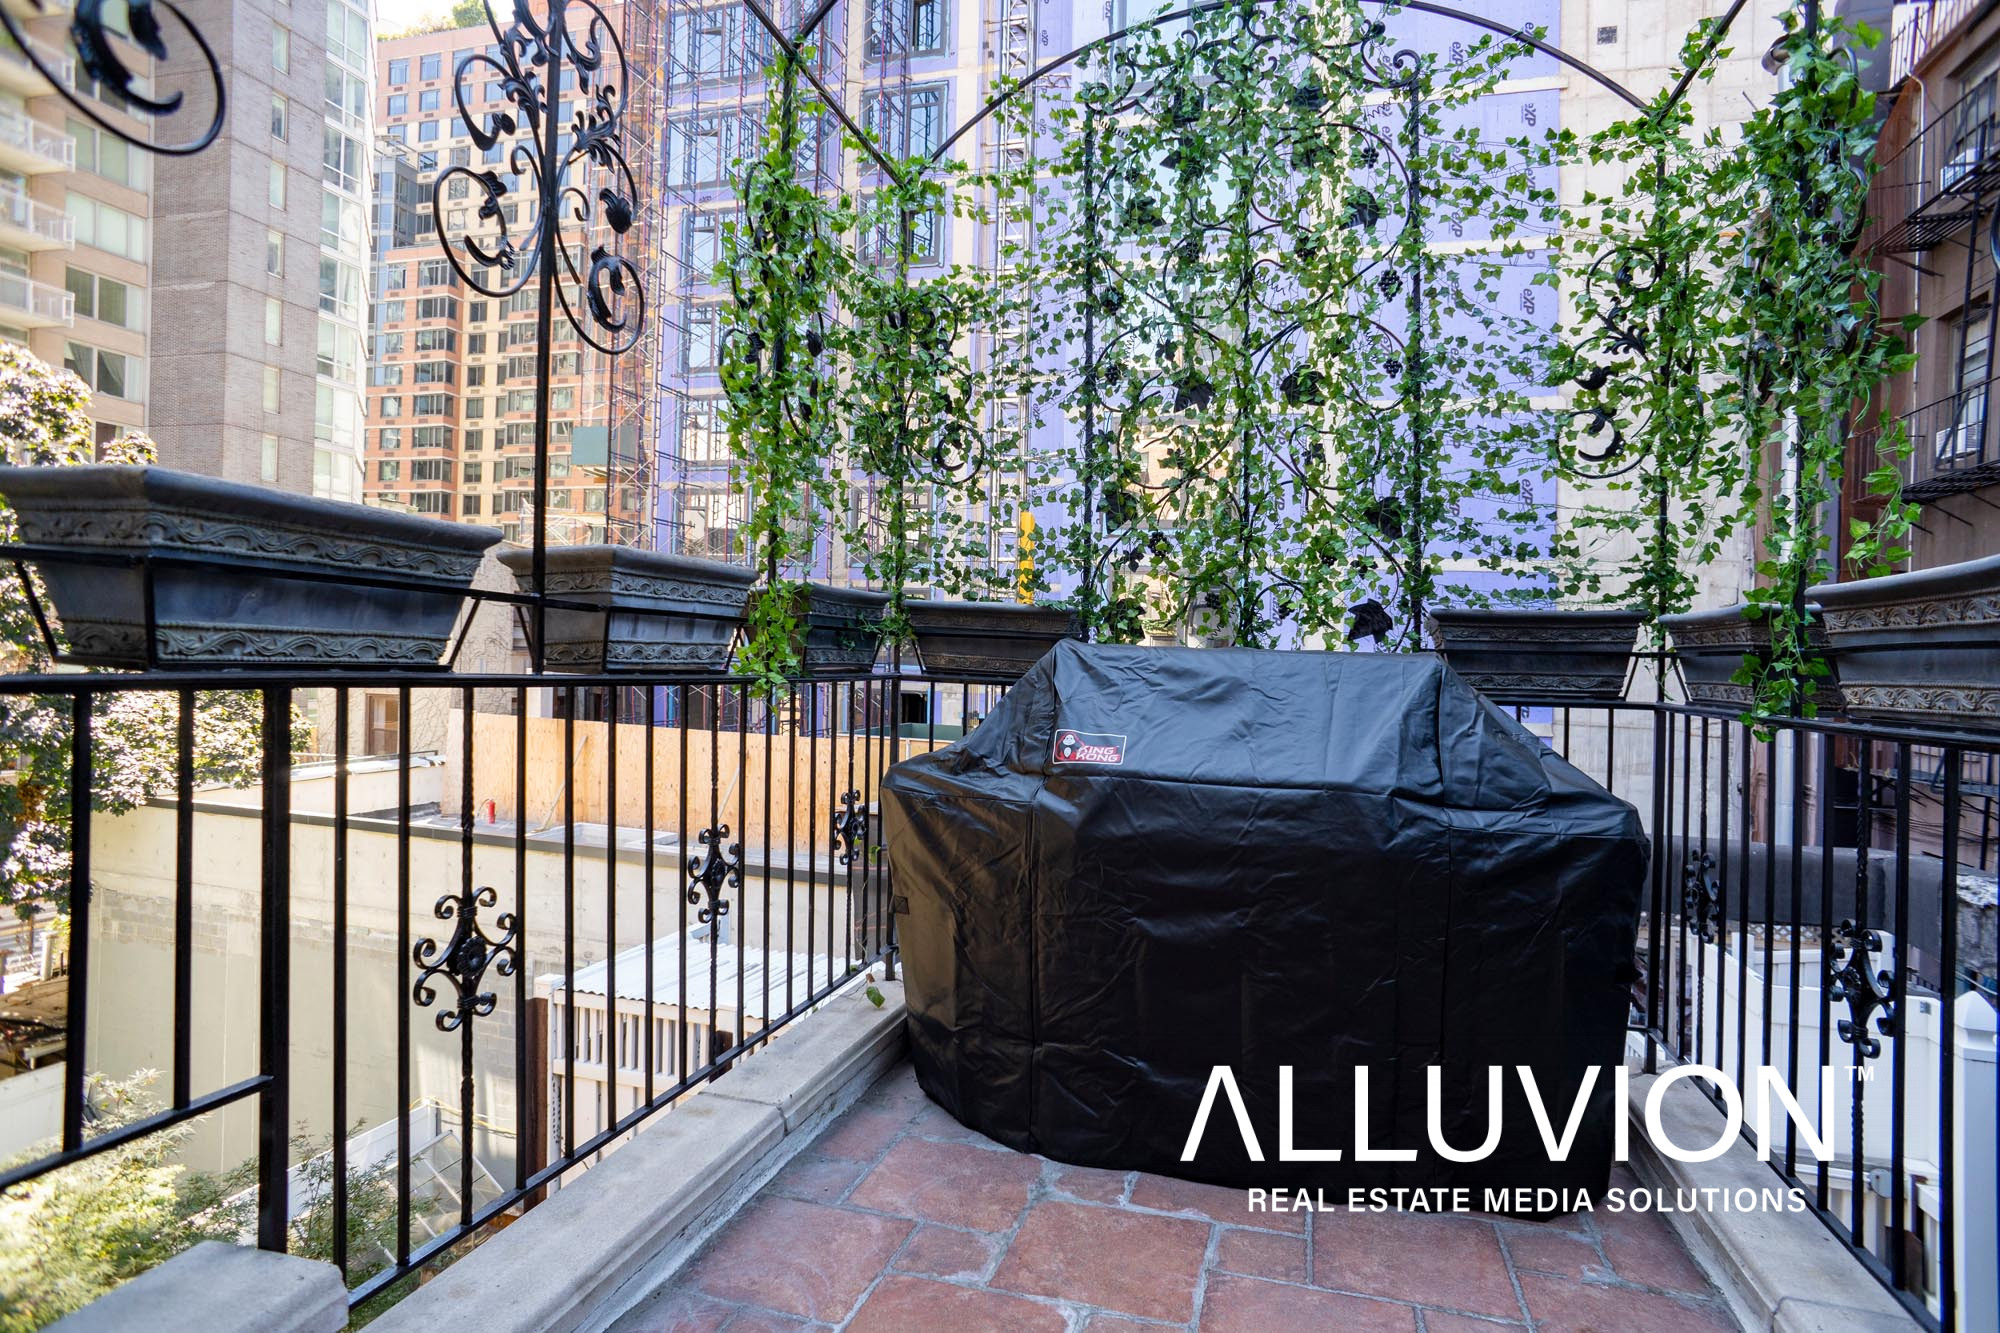 Historic Luxury in Midtown NYC – Airbnb Listing with a Rooftop Terrace – Airbnb Photography